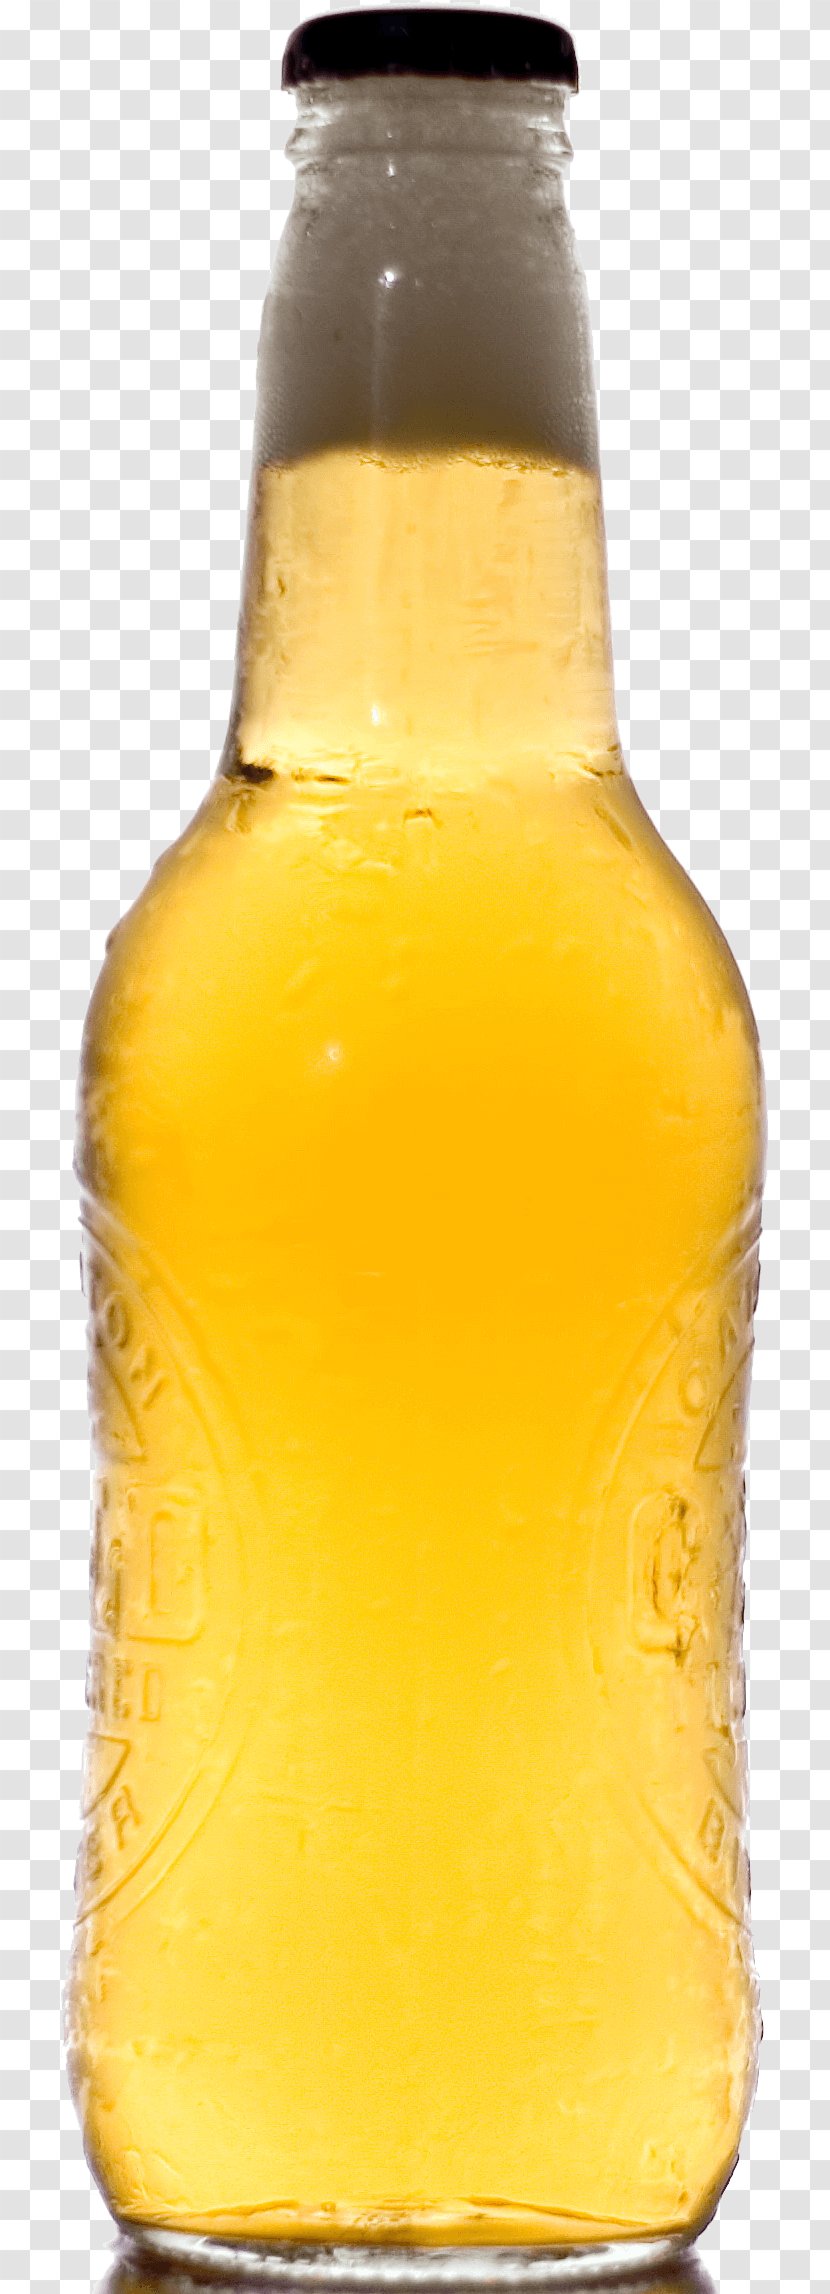 Beer Bottle Asahi Breweries Corona Ale - Party Transparent PNG